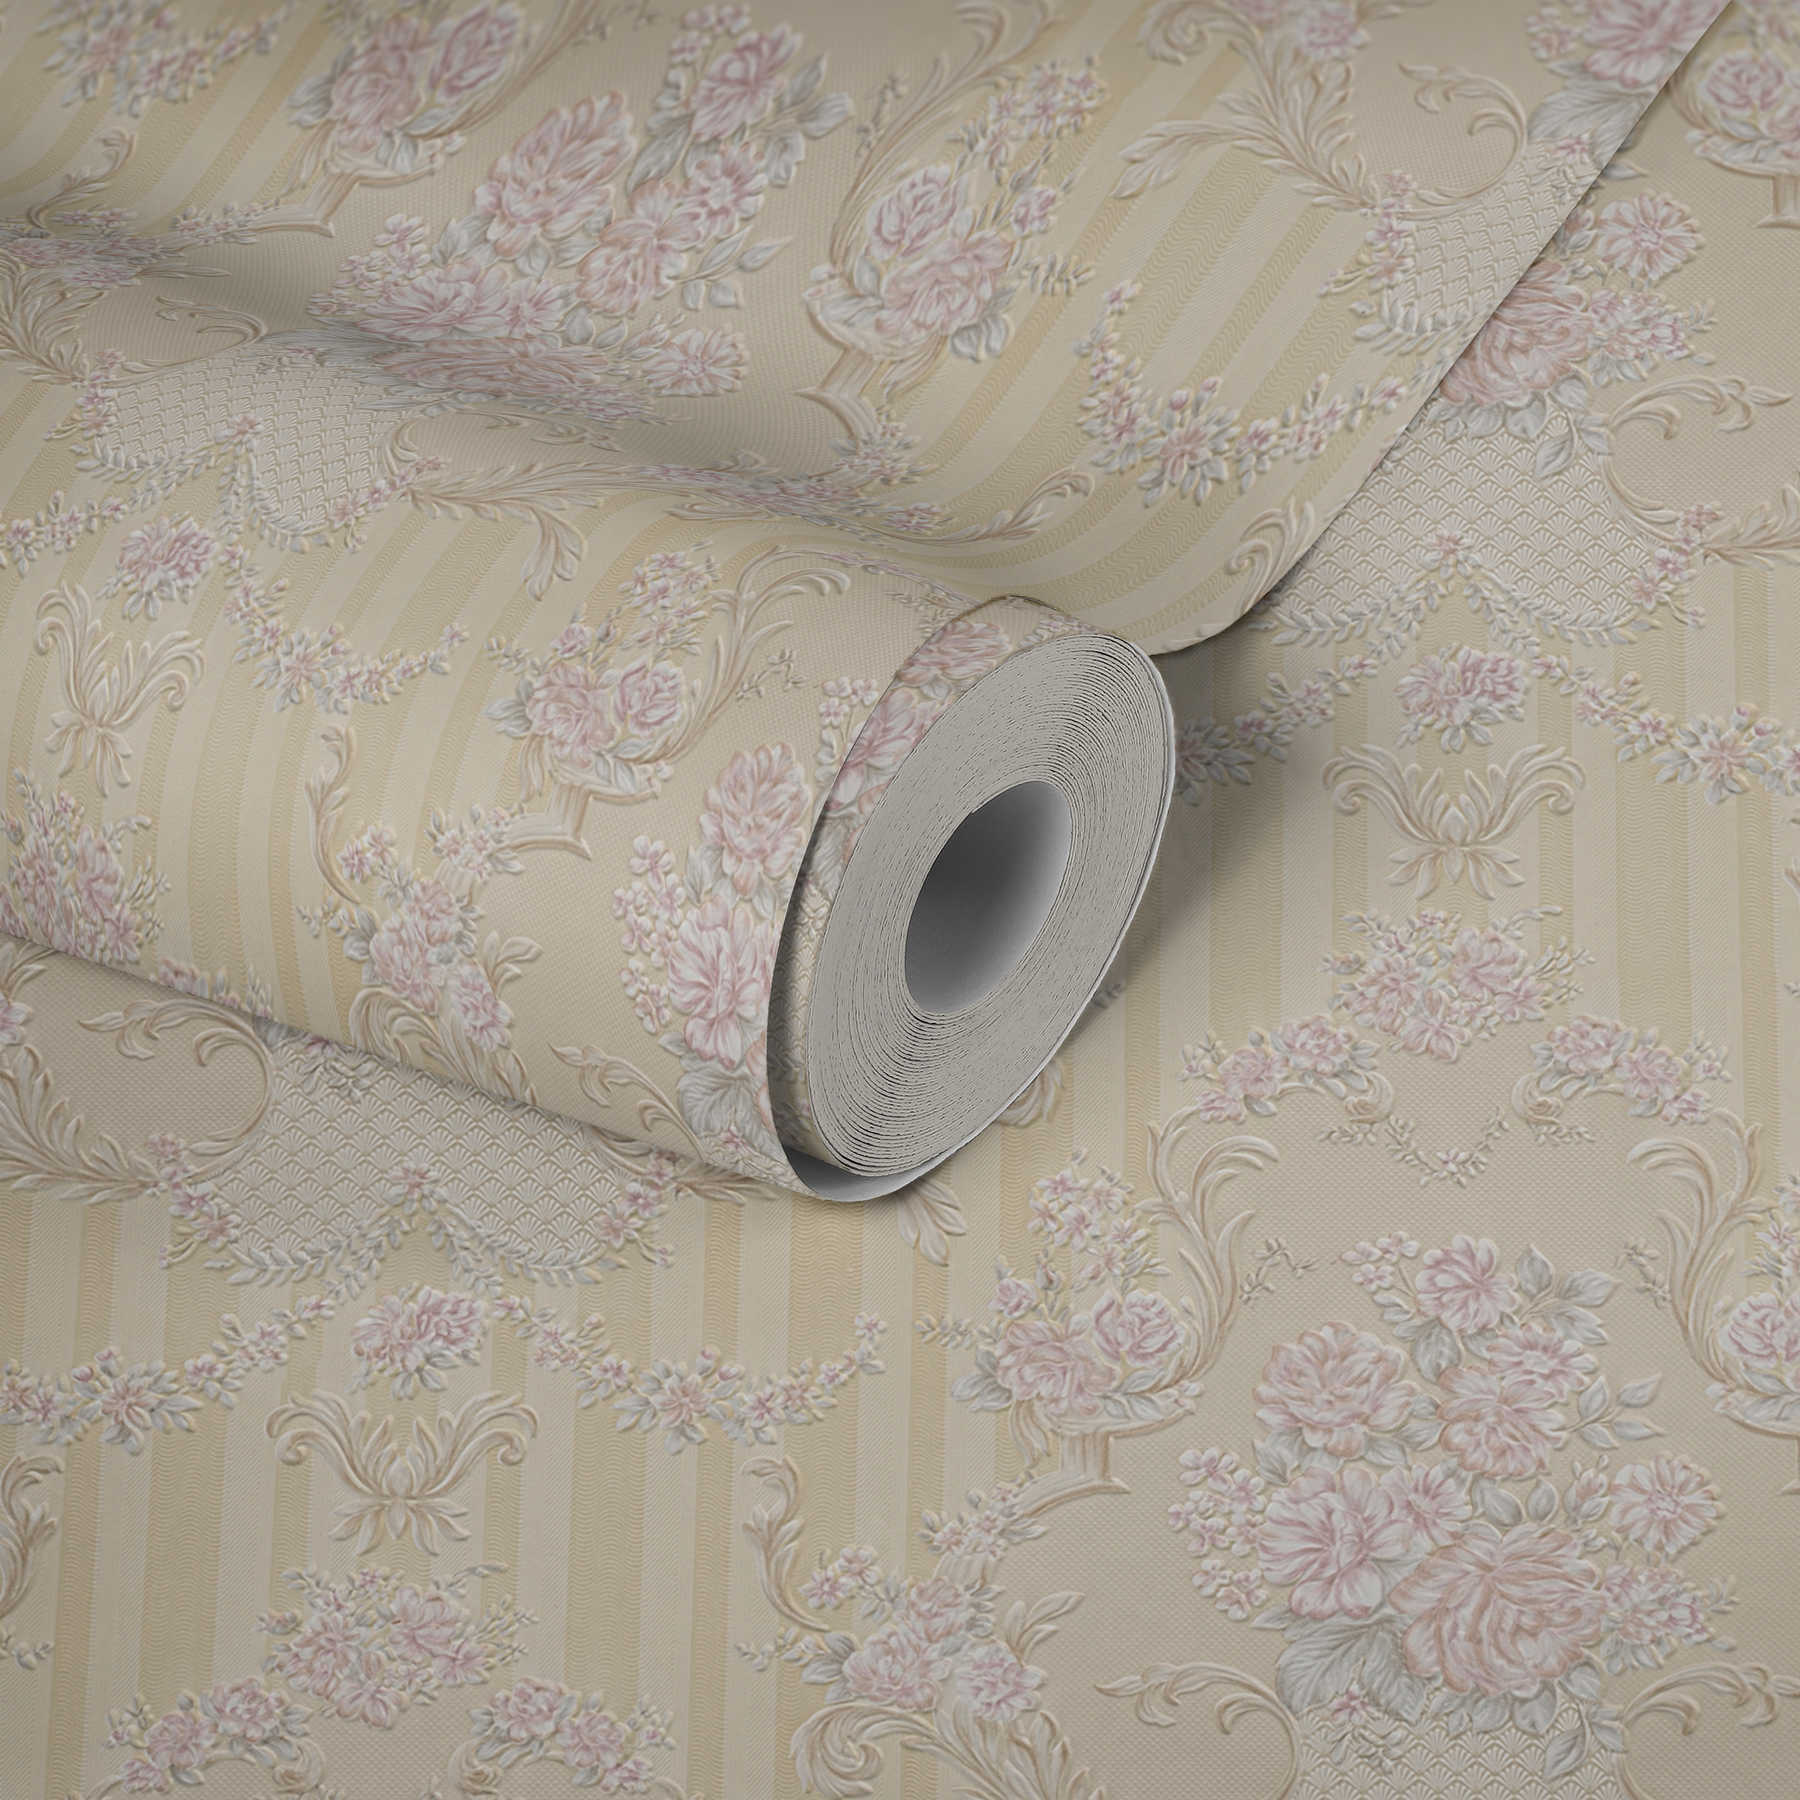             Neo baroque wallpaper with roses ornaments & stripes - beige, metallic
        